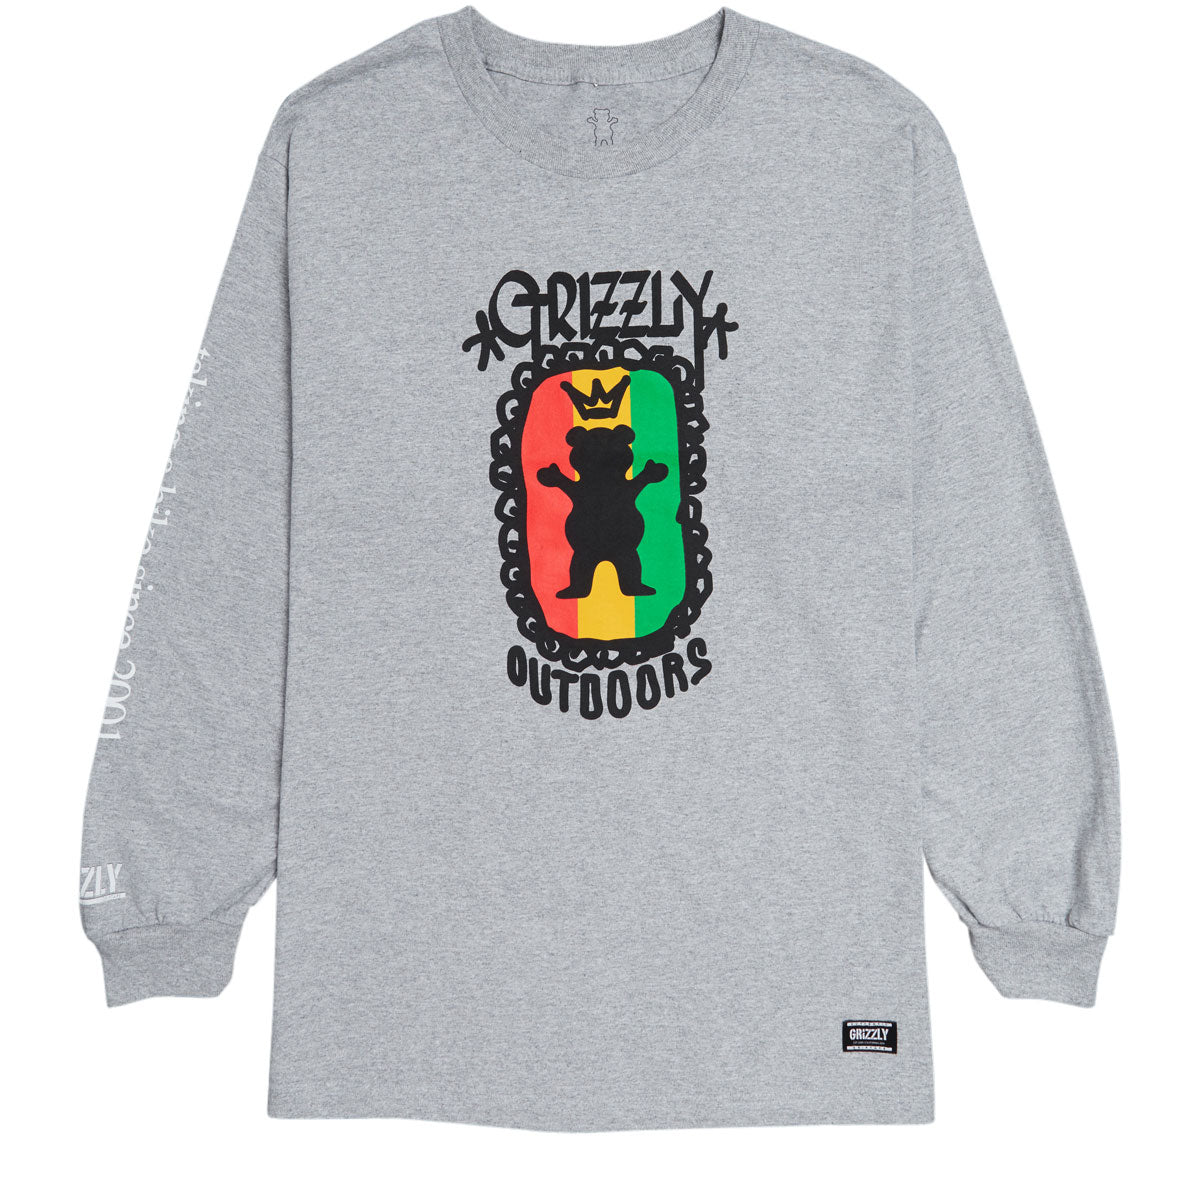 Grizzly Most High Long Sleeve T-Shirt - Heather Grey image 1